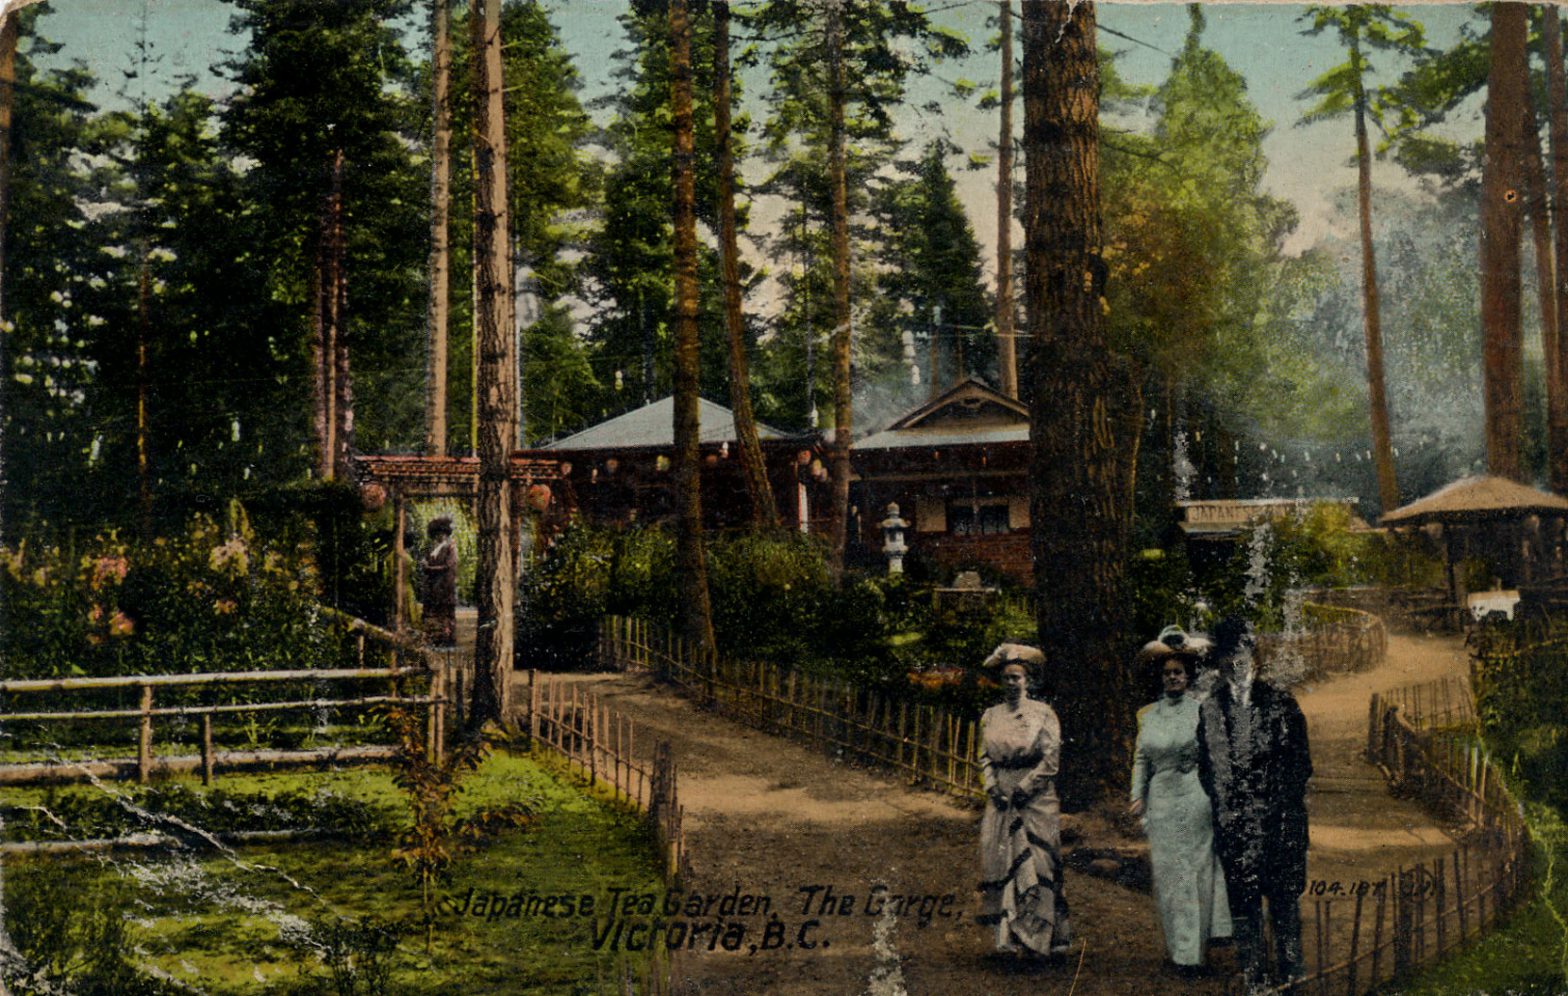 Postcard of the Japanese Tea Garden designed by Isaburo Kishidaat Gorge Park, Victoria, B.C. This postcard is postmarked in 1913.(Author's collection)